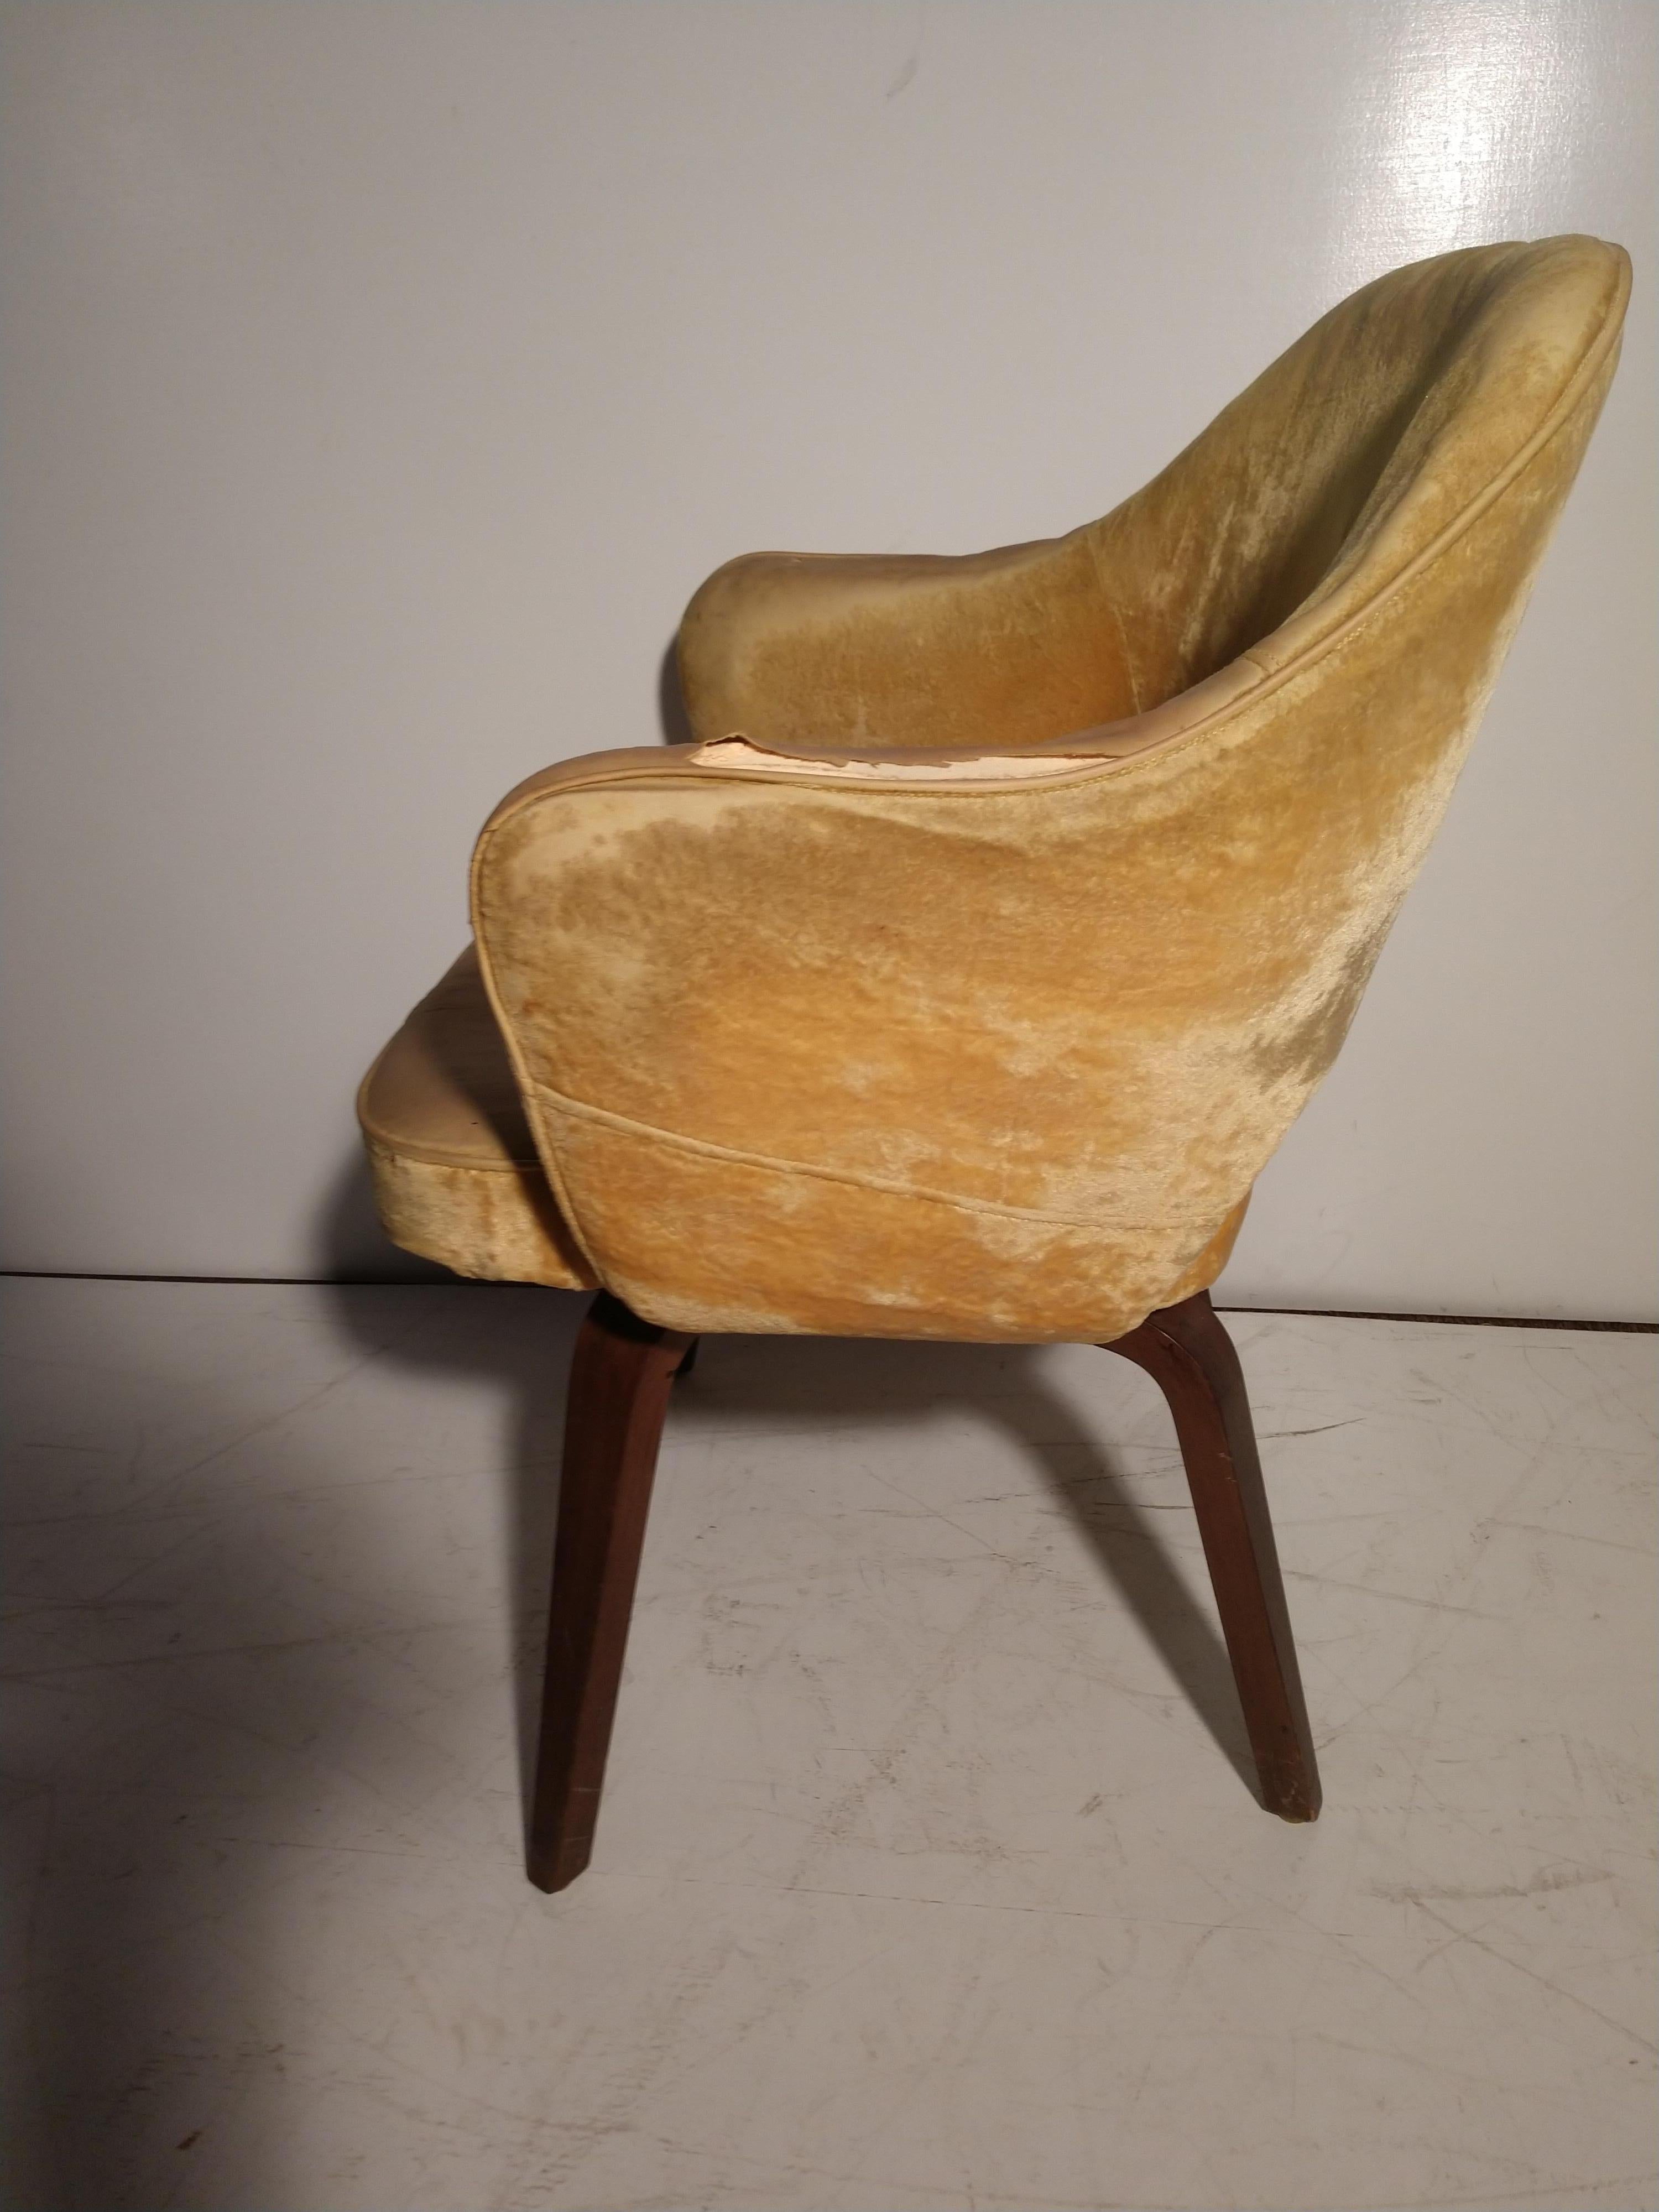 Vintage Saarinen executive chair in as found condition. Frame is excellent, legs are excellent, foam and fabric need instant attention. A great chair to use and put your own fabric on. Fabulous as a dining chair or just to lounge on.